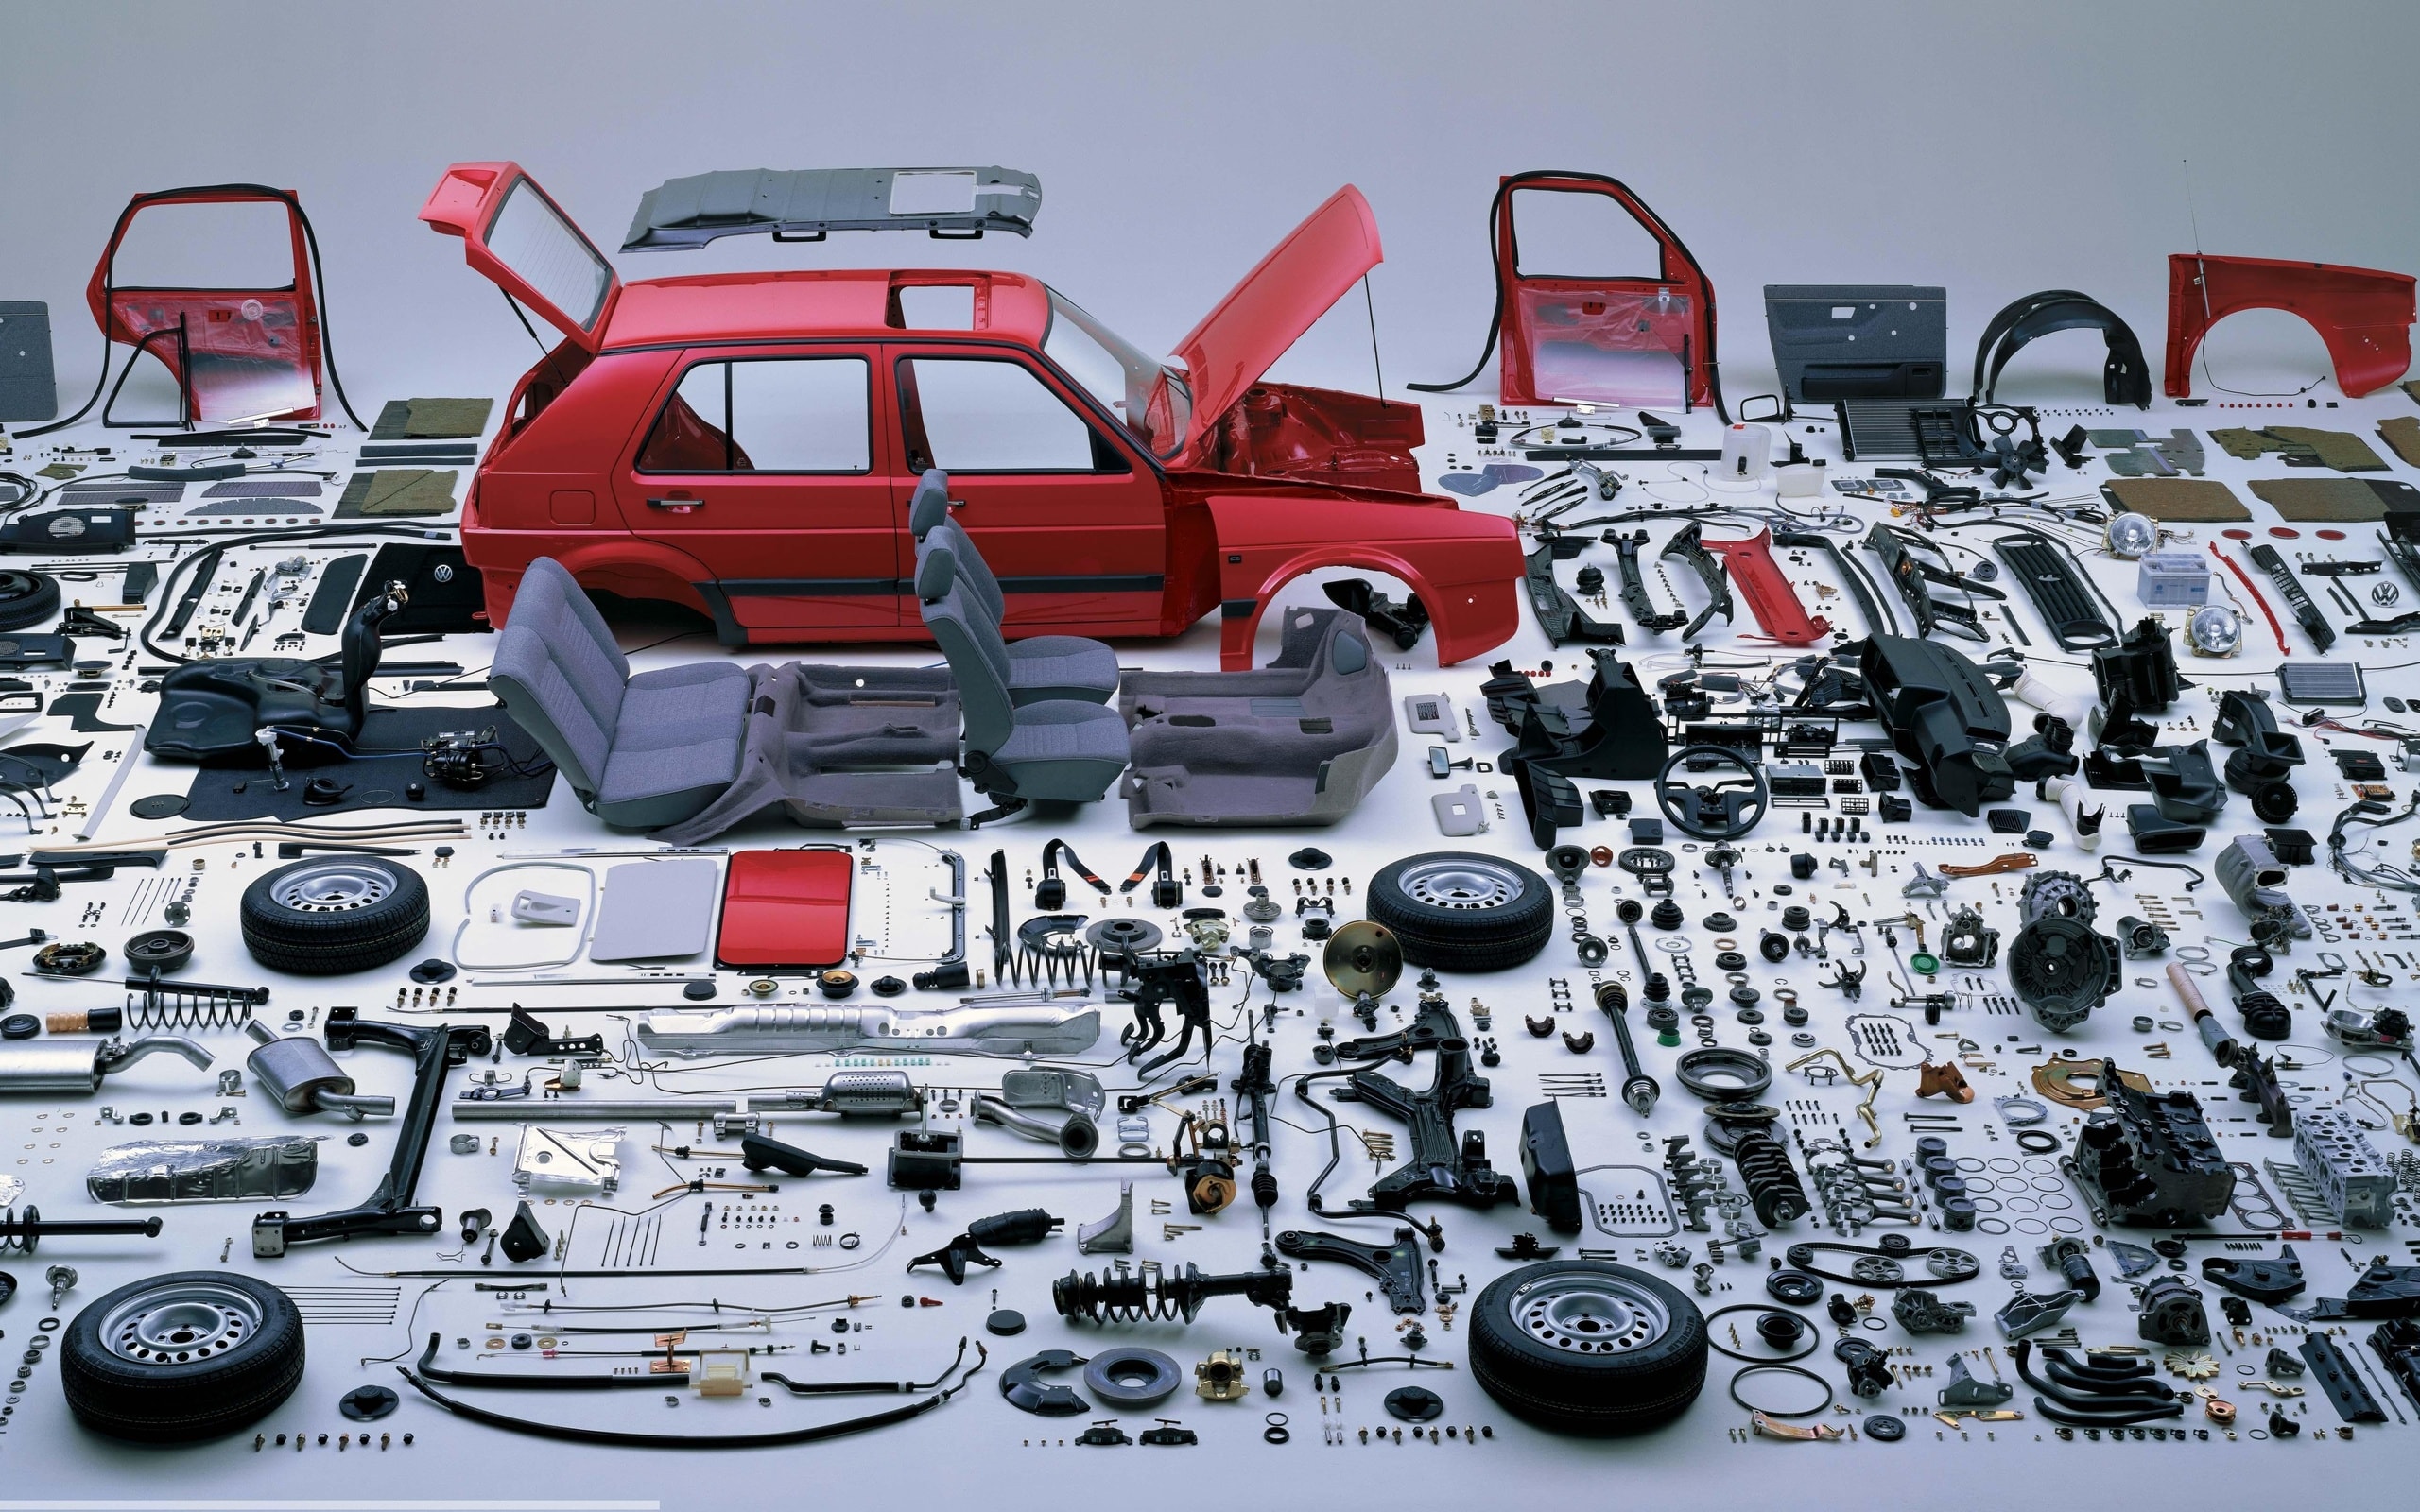 disassembled car parts #3359 Wallpapers and Free Stock Photos ...